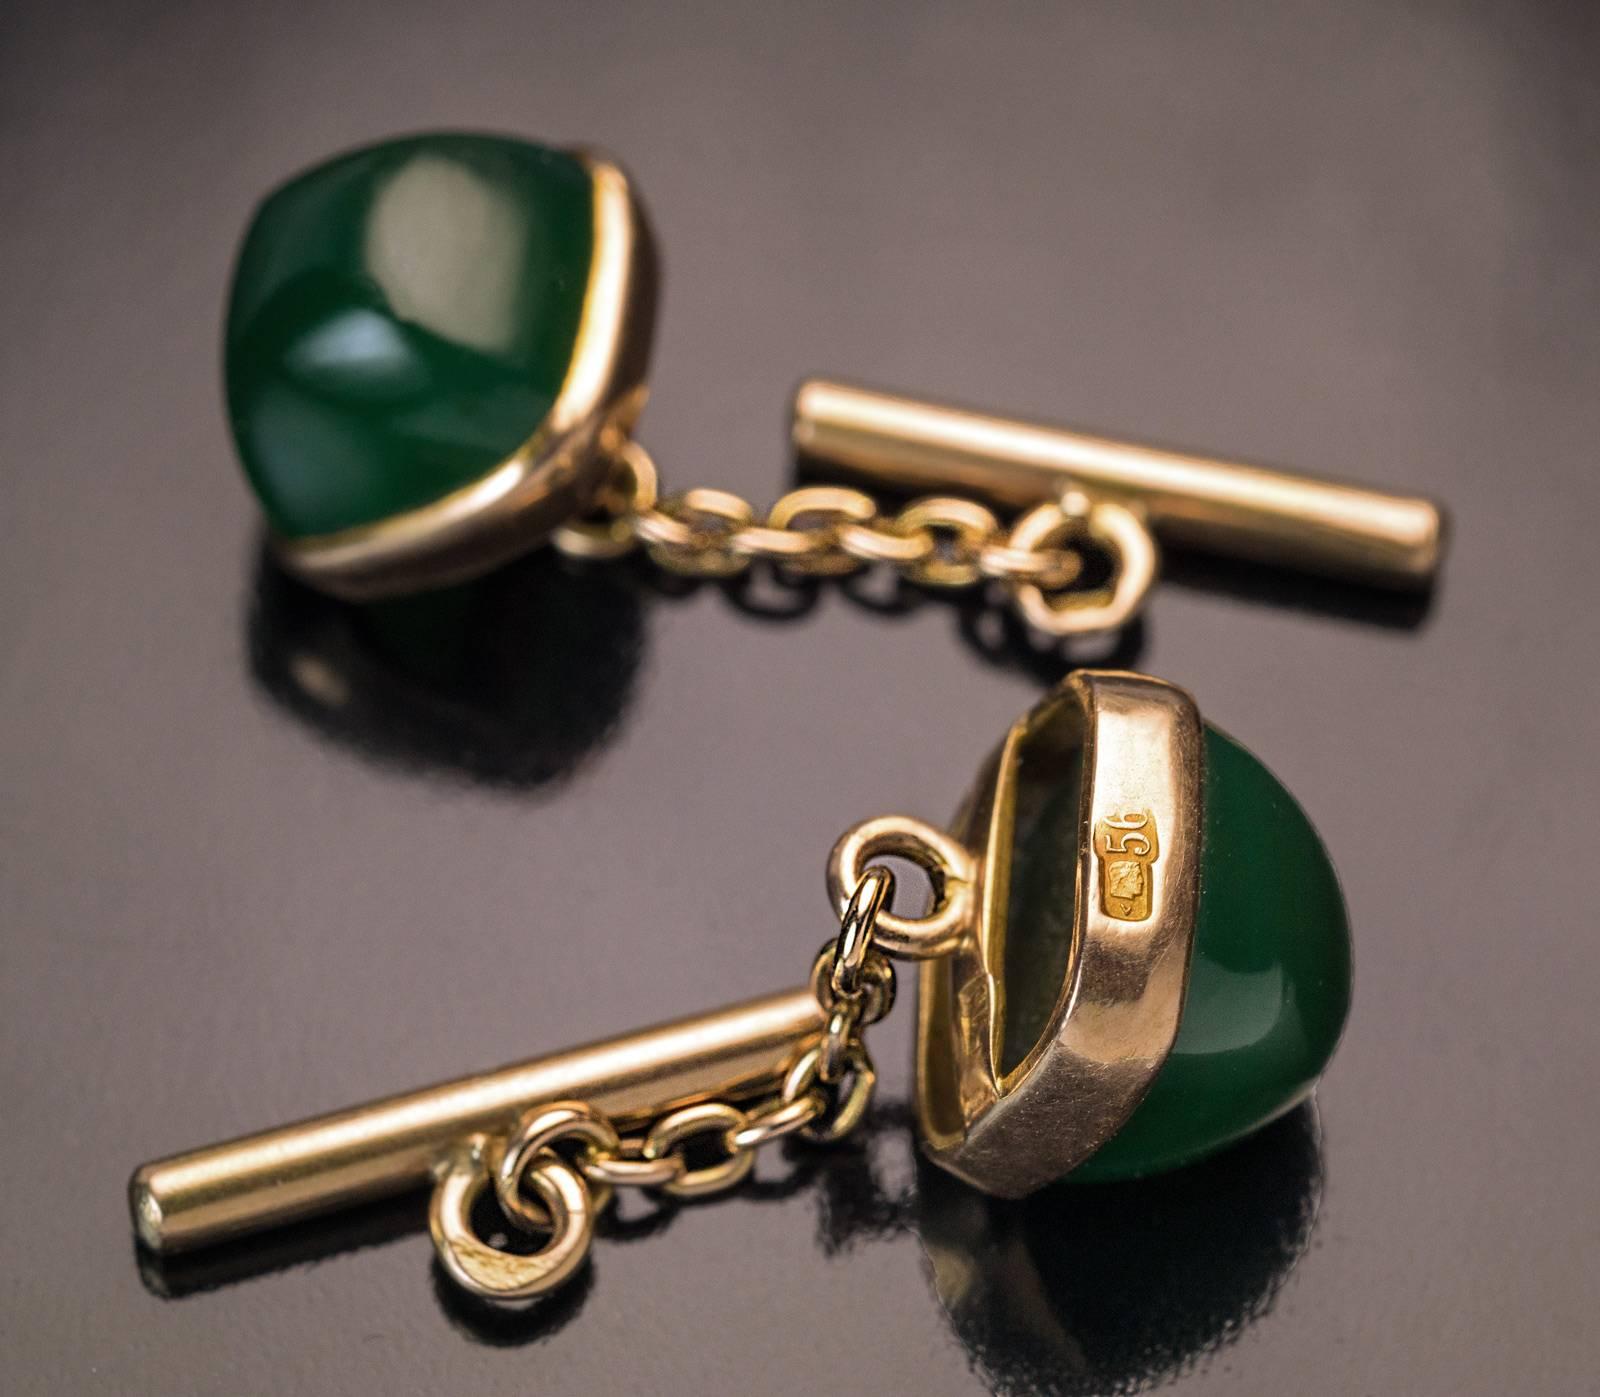 Made in Kiev between 1908 and 1917
14K gold cufflinks are set with sugarloaf cut Siberian nephrite jade of a deep green color. The cufflinks are marked with 56 zolotnik old Russian gold standard and maker’s initials ‘И Л’.

Width 12 mm (7/16 in.)